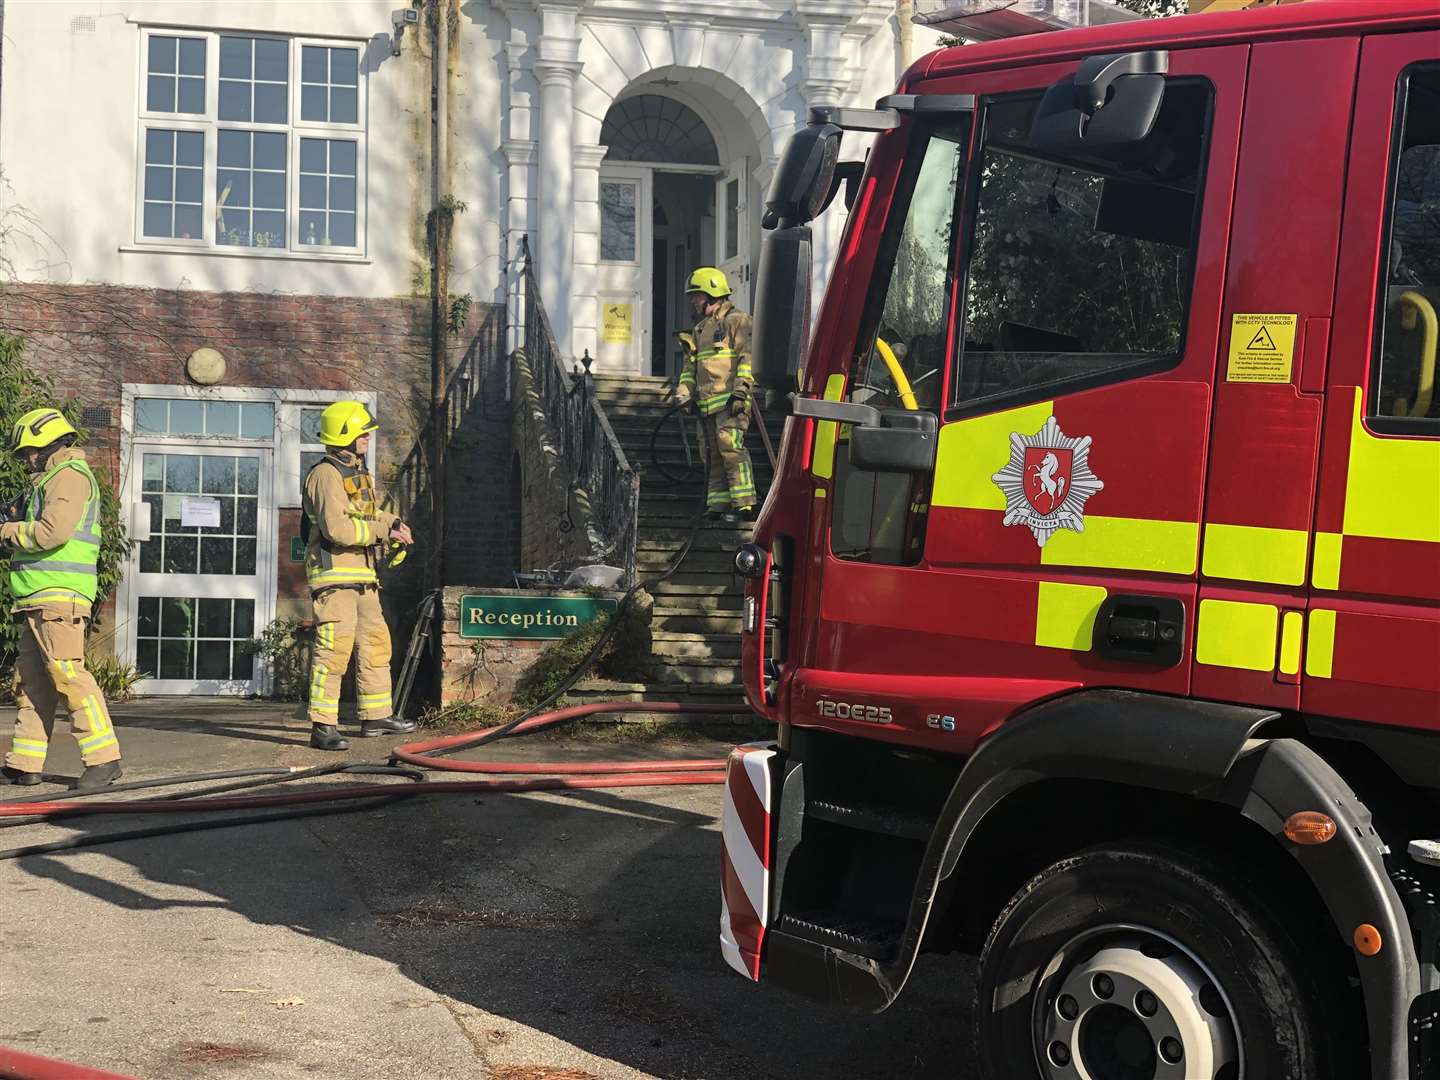 Firefighters arrive at the 'burning' school as part of their training (7293019)